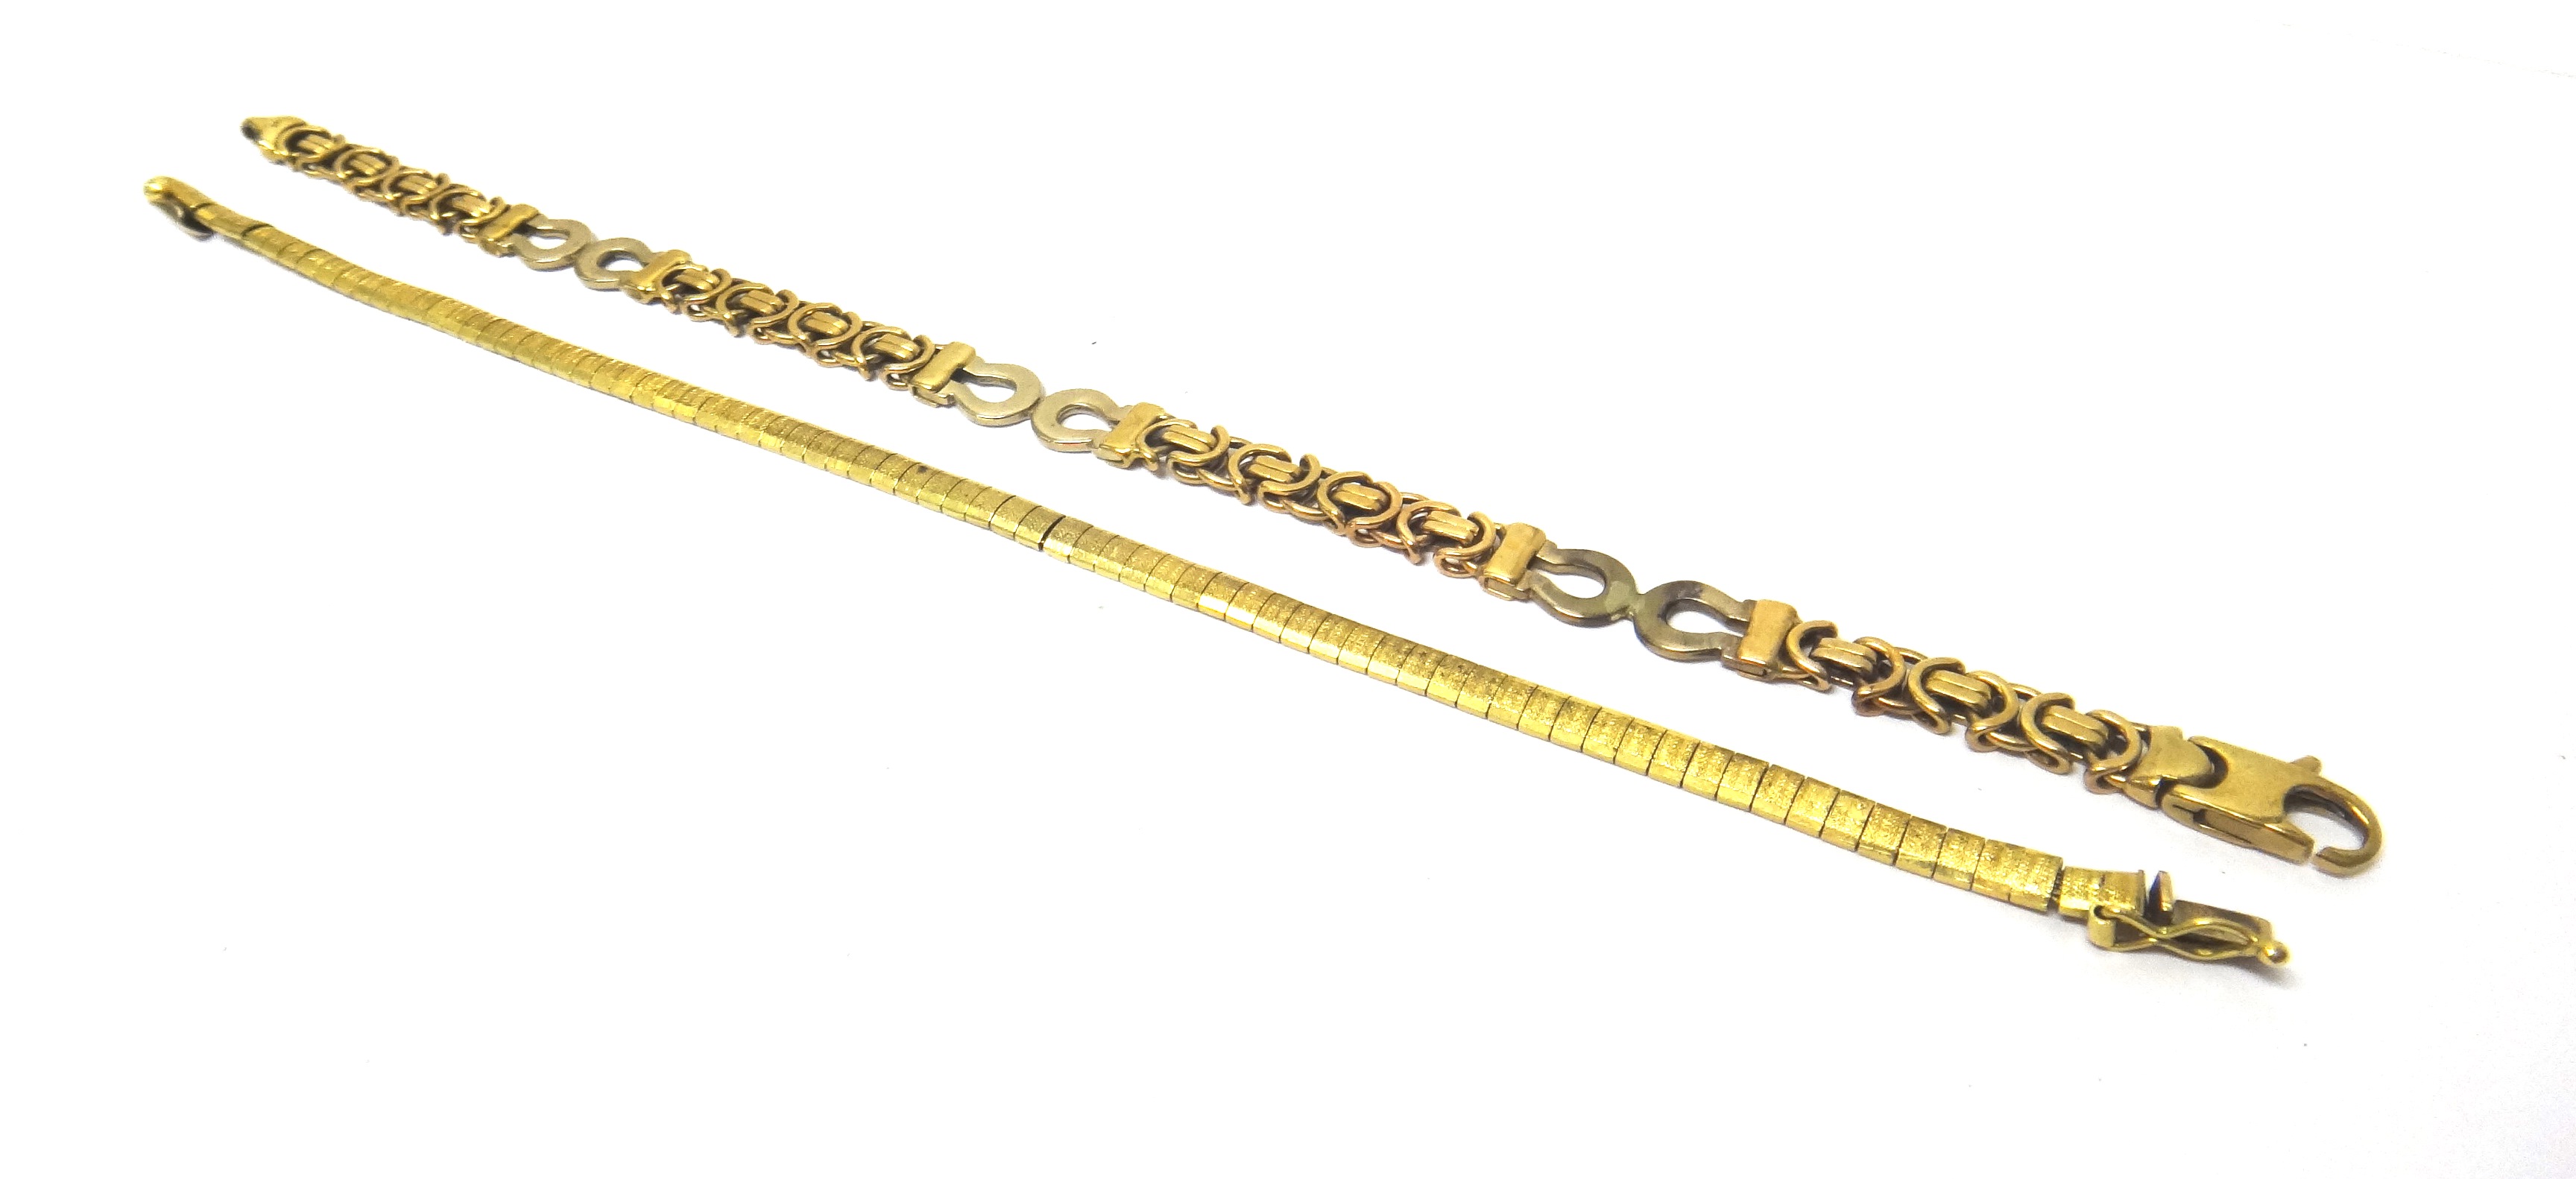 A 9ct two colour gold bracelet, in an interwoven and horseshoe shaped link design, on a sprung